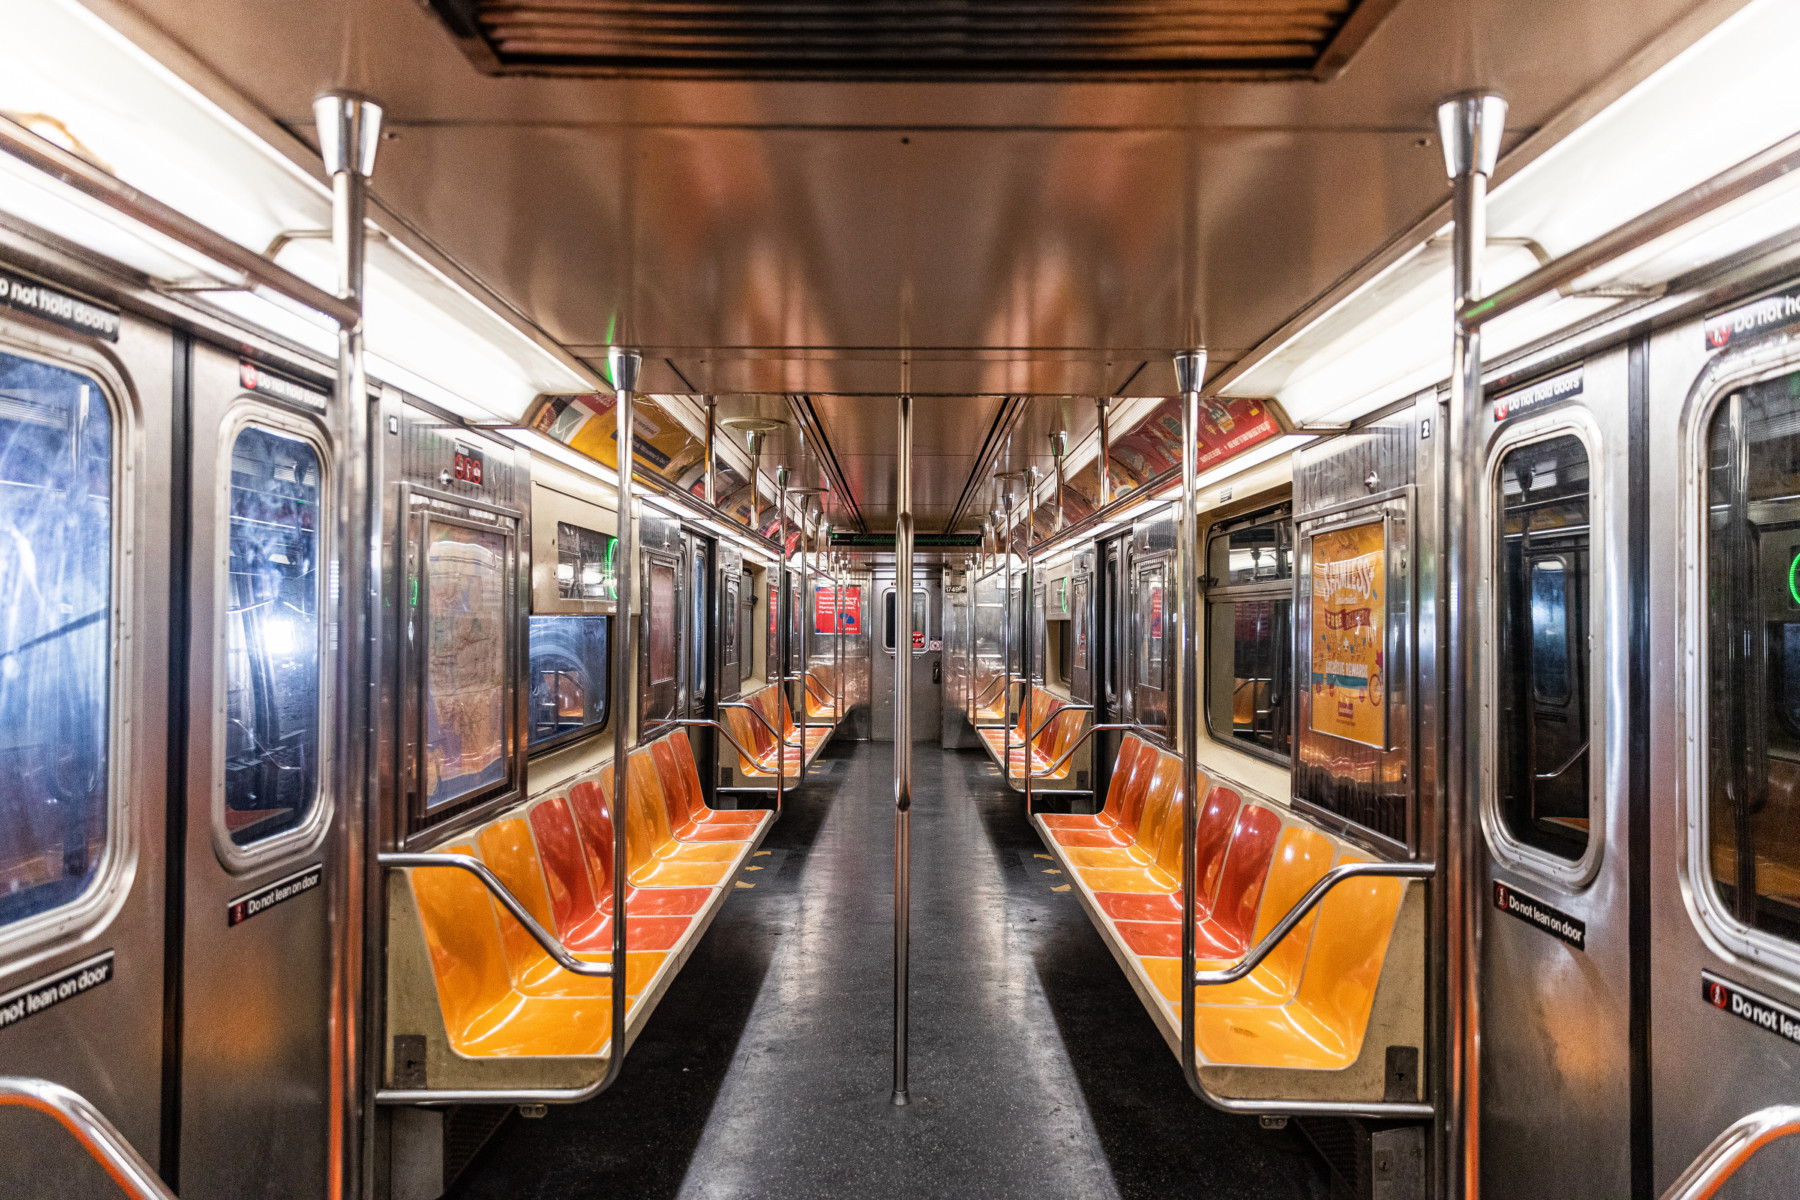 A New York subway car is completely void of people during peak hours